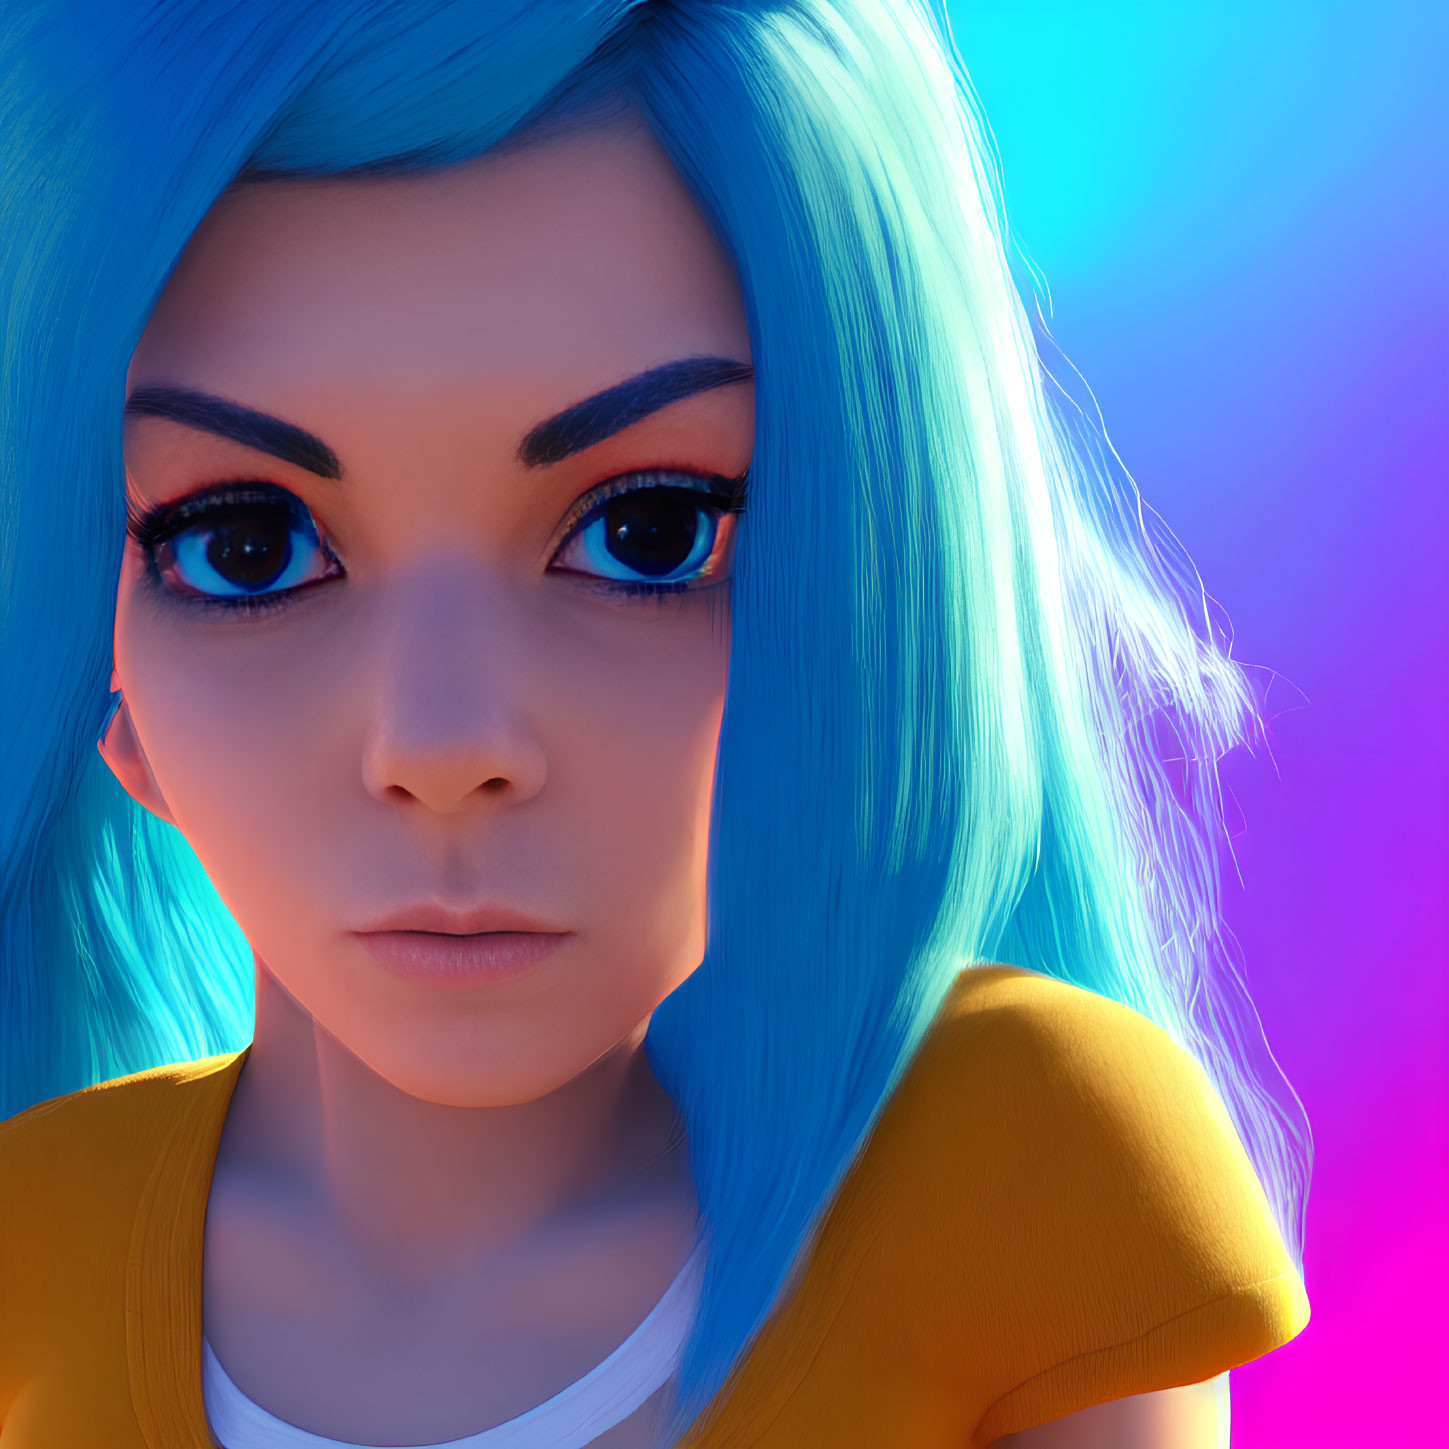 Vivid Blue Hair Female Character on Neon Gradient Background